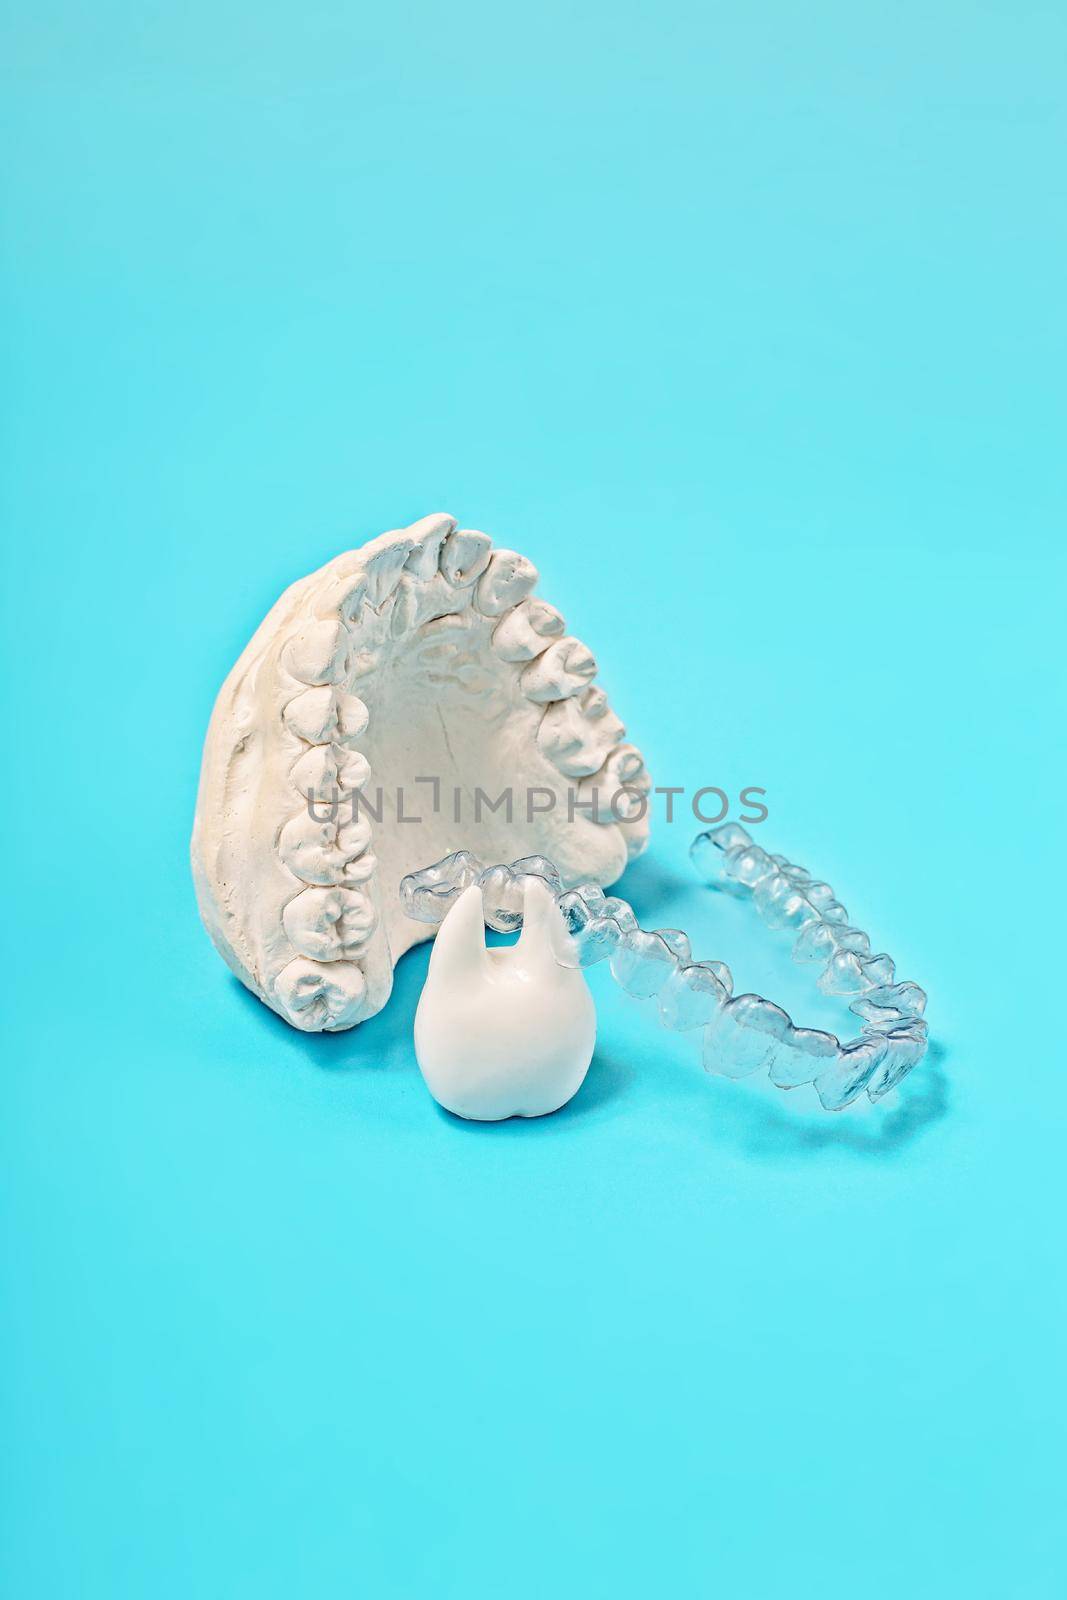 Orthodontic dental theme on blue background. Transparent invisible dental aligners or braces aplicable for an orthodontic dental treatment by Maximusnd